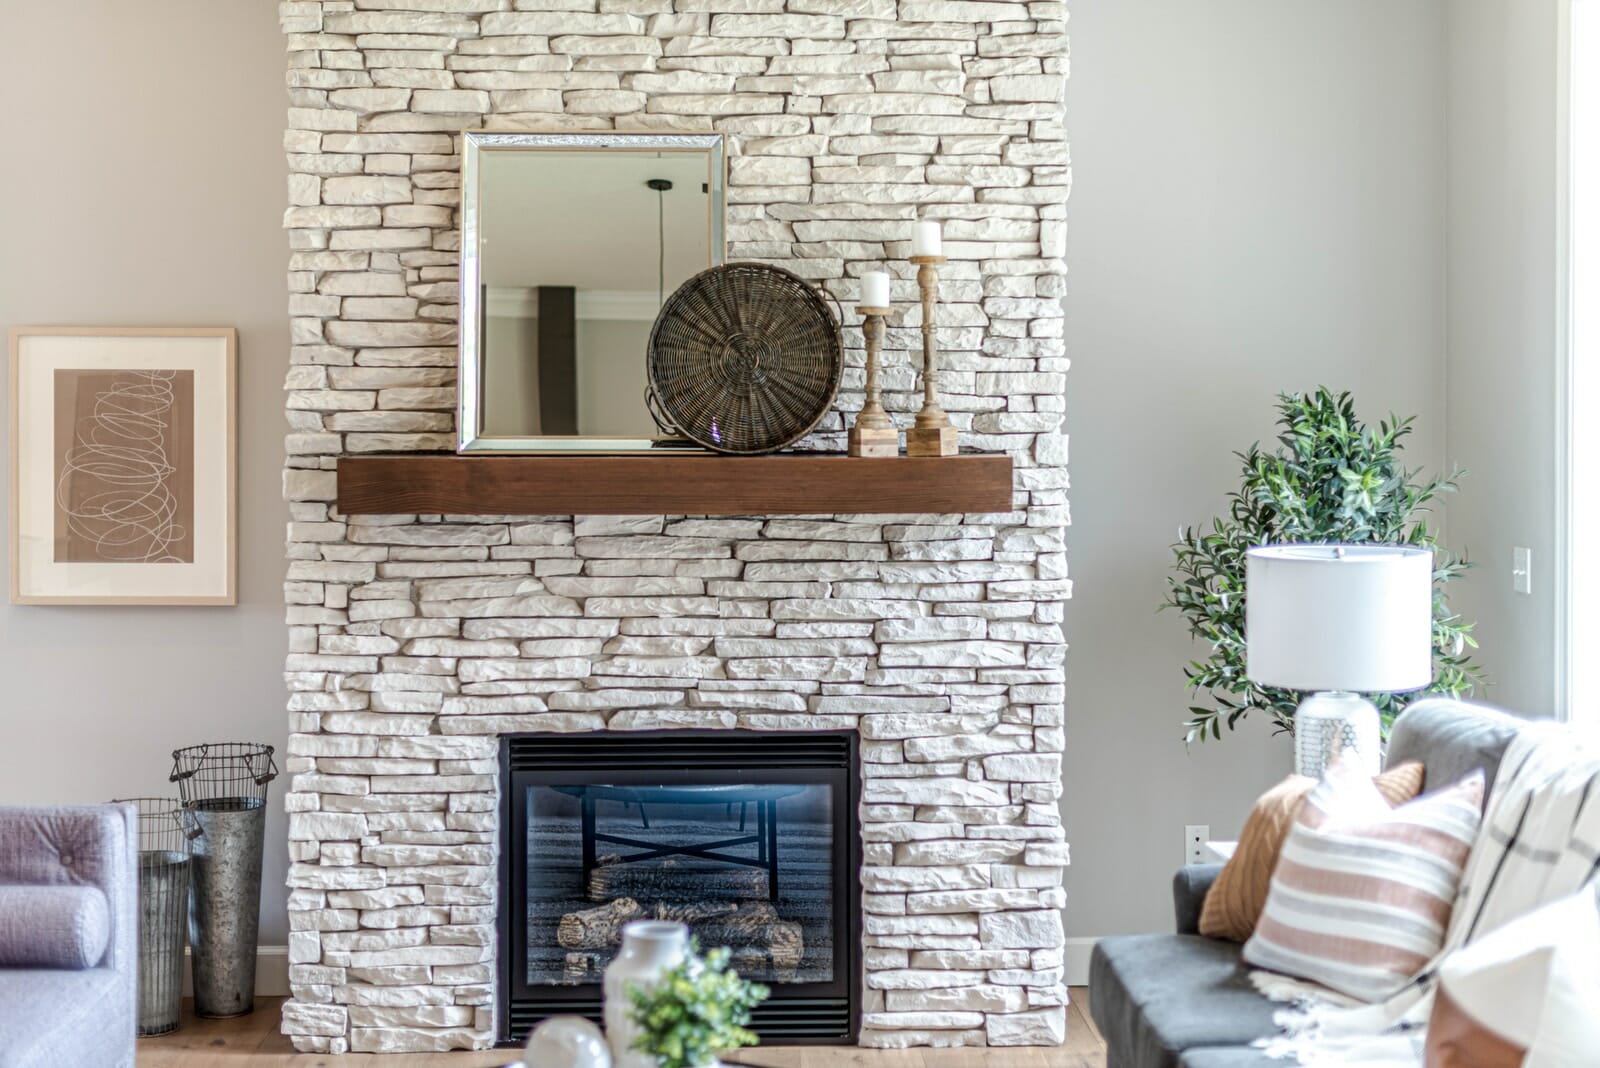 Style of your fireplace